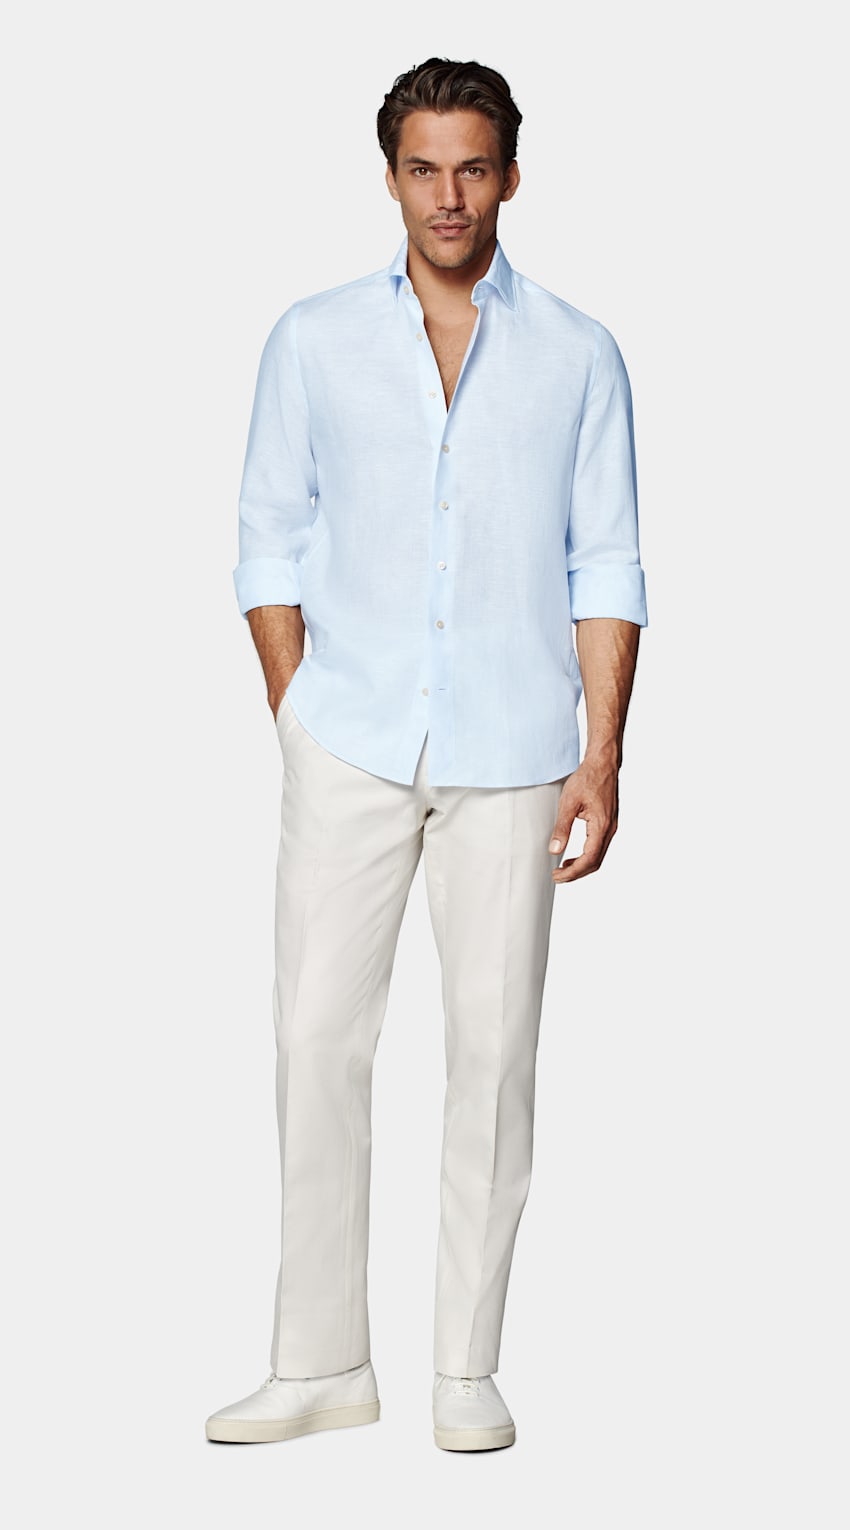 SUITSUPPLY Pure Linen by Albini, Italy Light Blue Extra Slim Fit Shirt